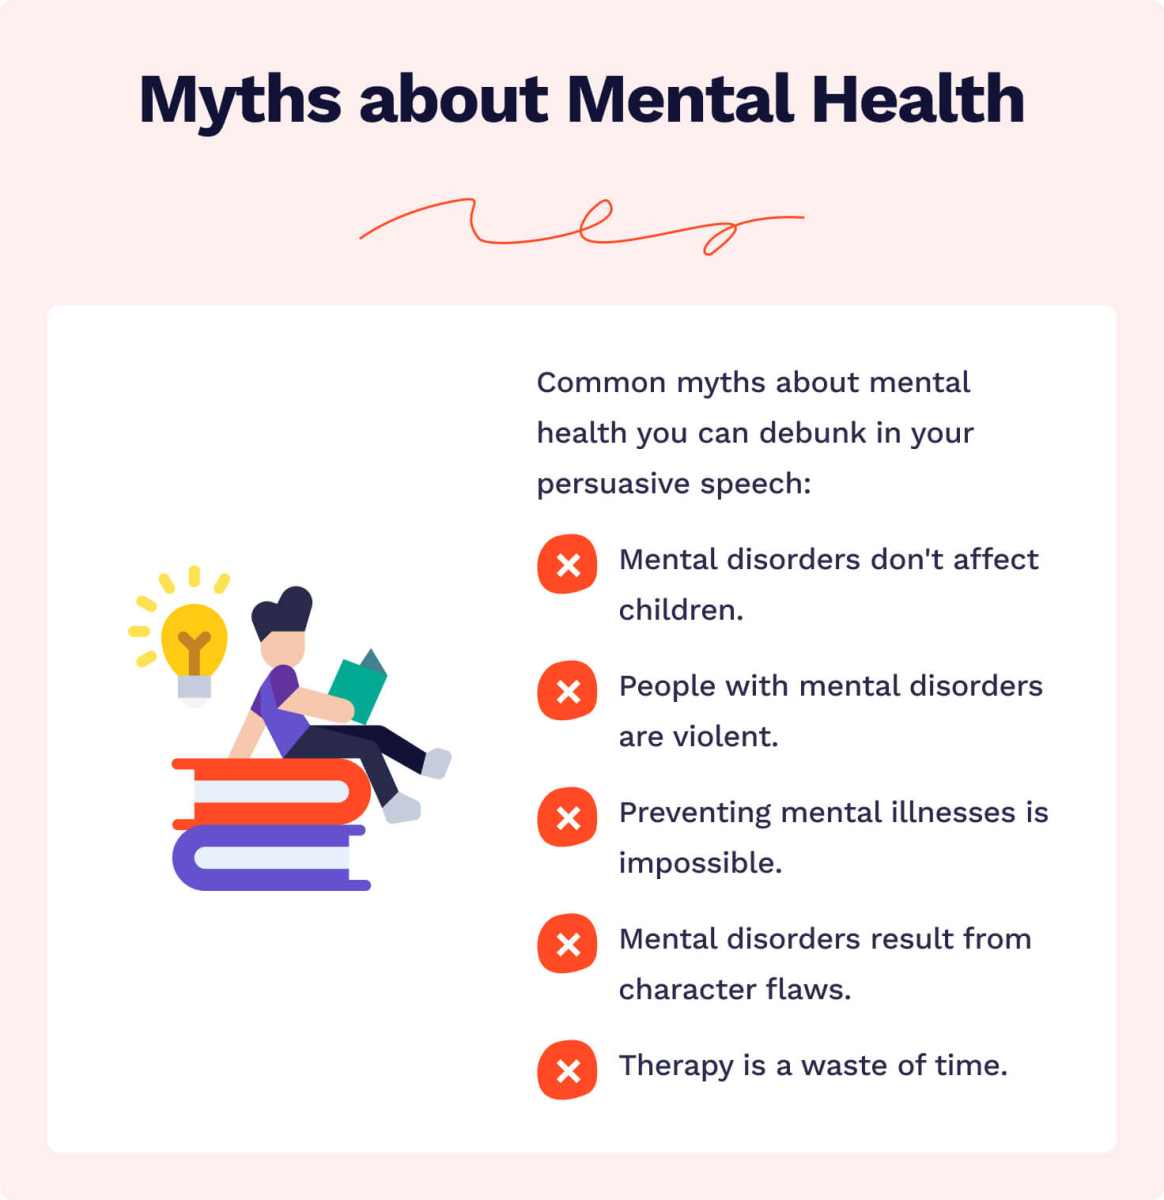 This image lists common myths about mental health.